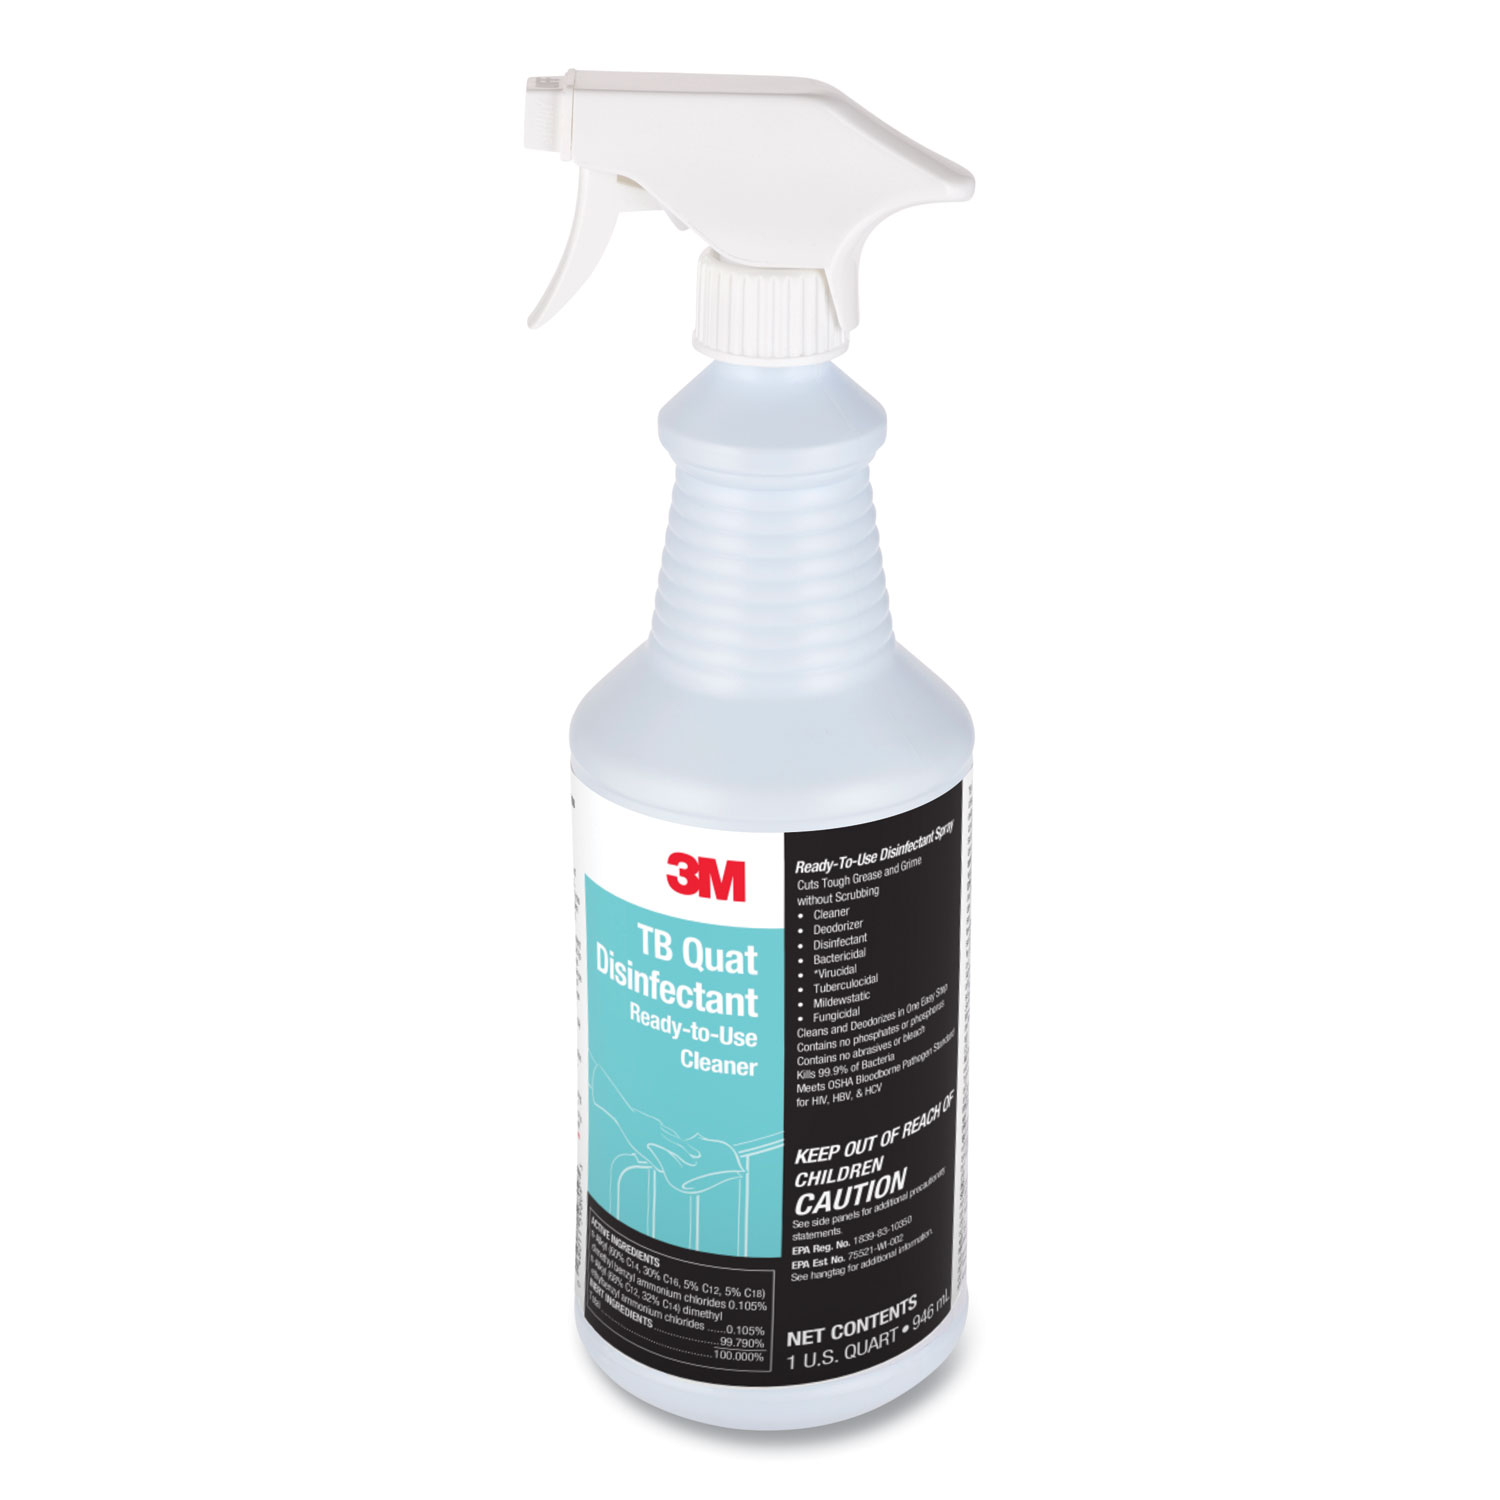  3M 29612 TB Quat Disinfectant Ready-to-Use Cleaner, 32 oz Bottle, 12 Bottles and 2 Spray Triggers/Carton (MMM29612) 